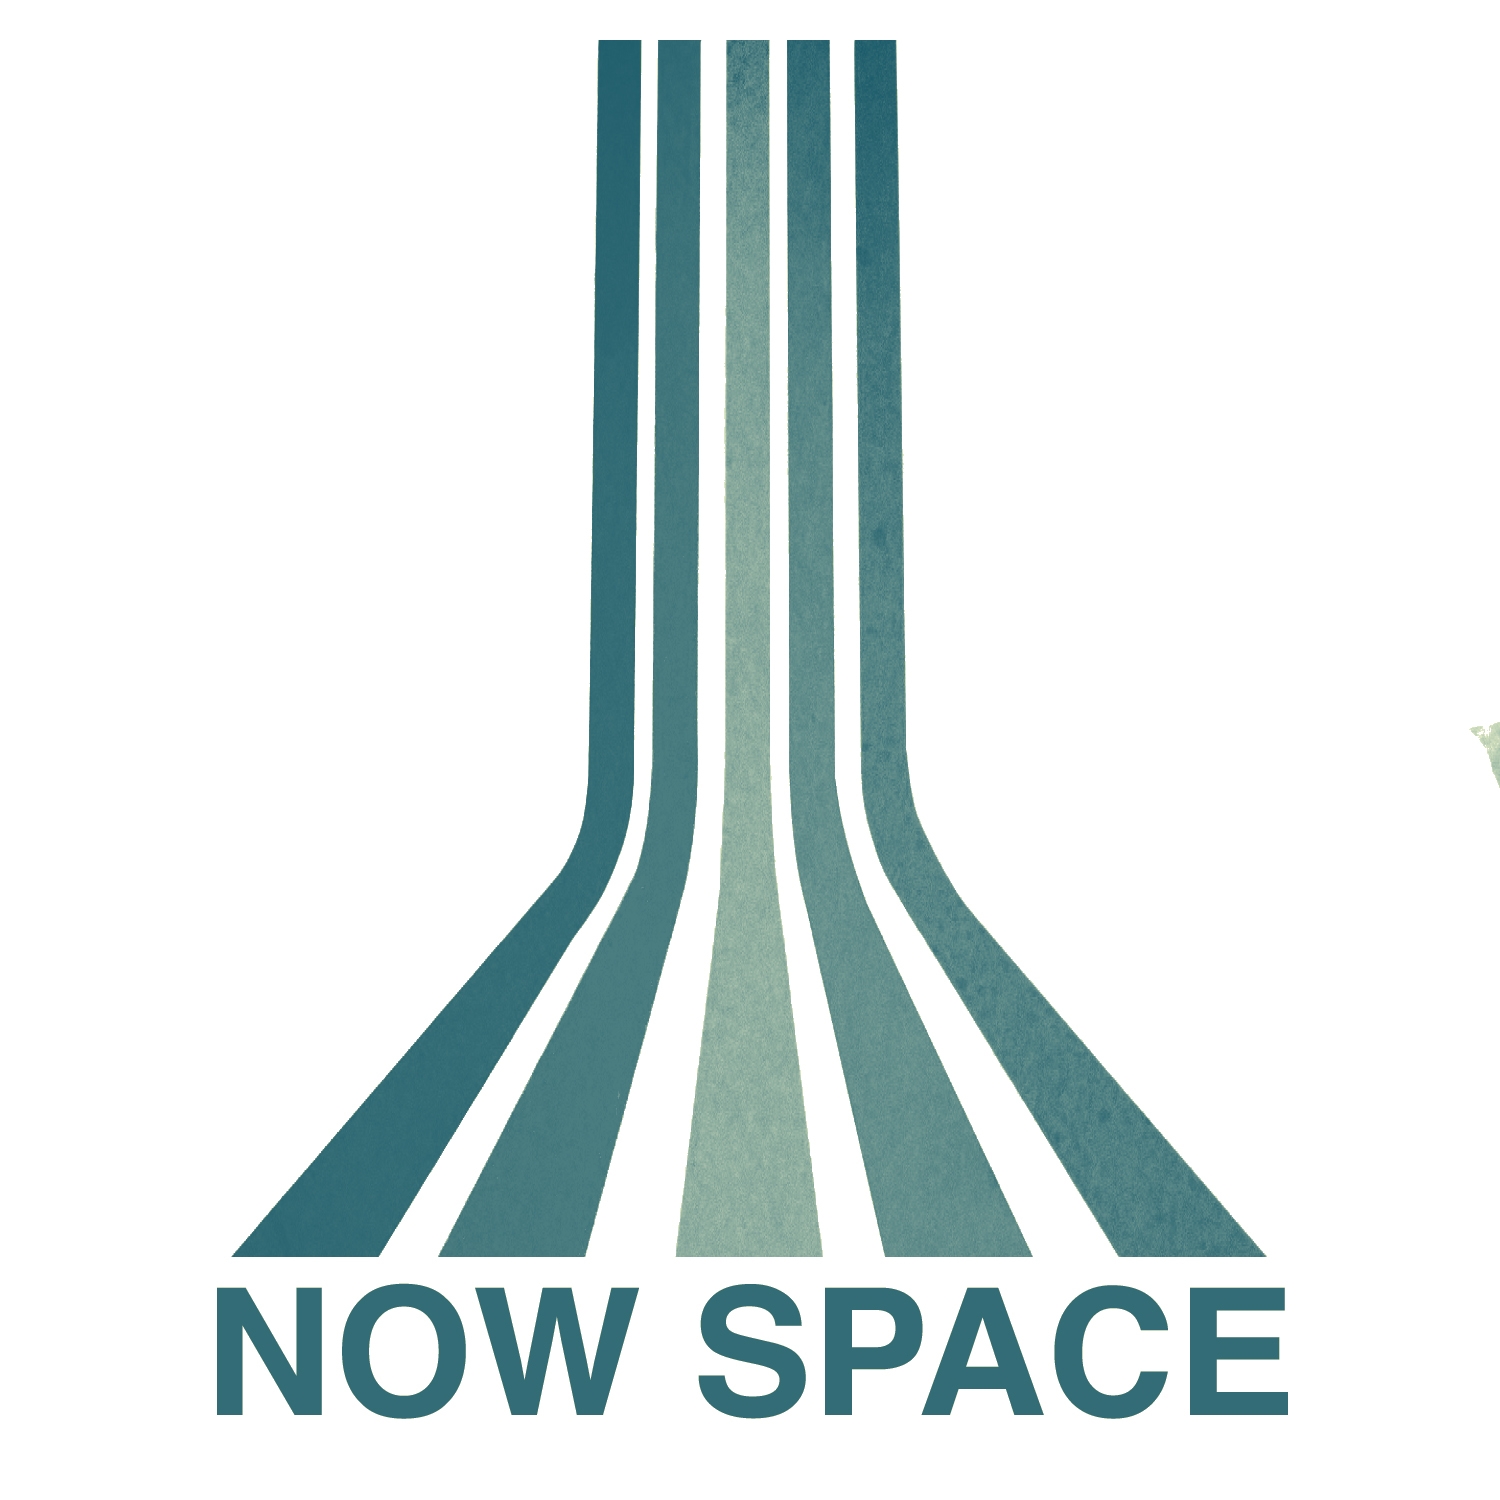 NowSpace